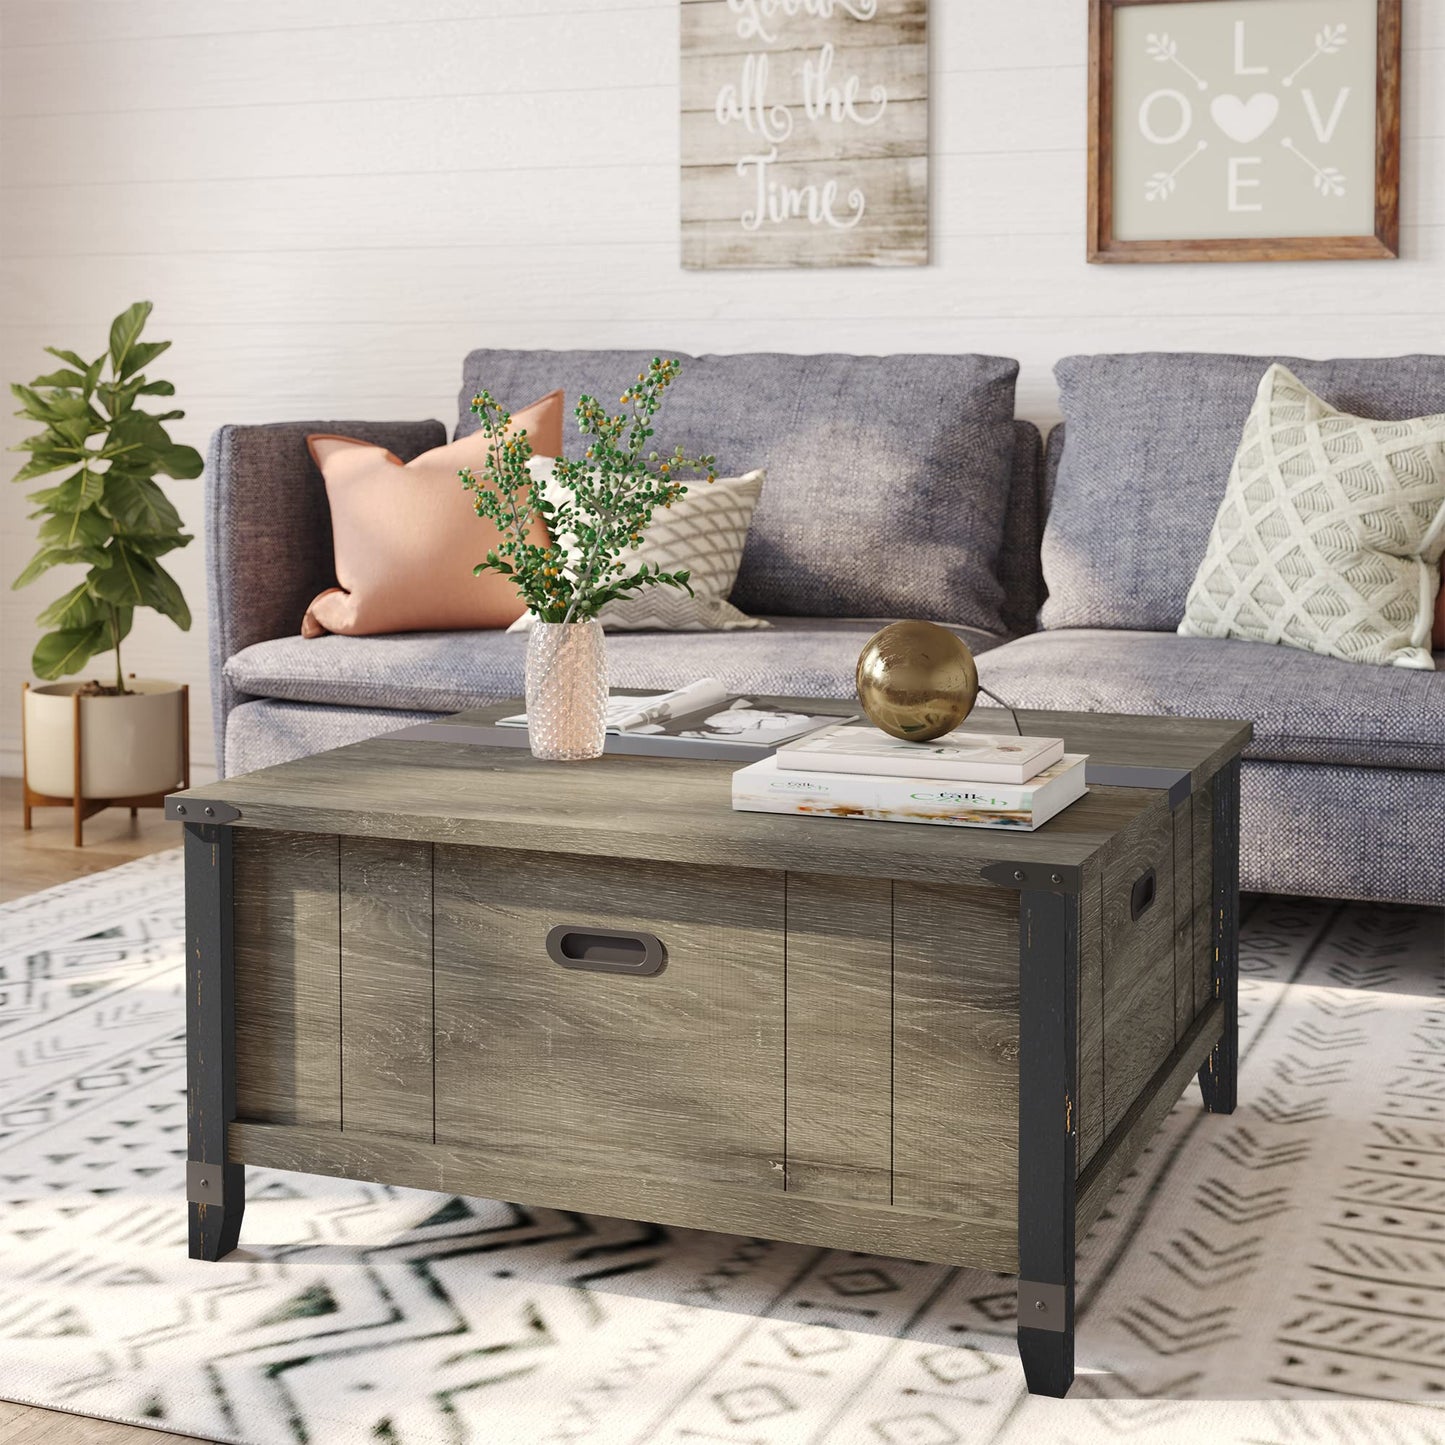 Bestier Farmhouse Coffee Table, Square Wood Center Table with Large Hidden Storage Compartment for Living Room, Rustic Cocktail Table with Hinged Lift Top for Home, Grey